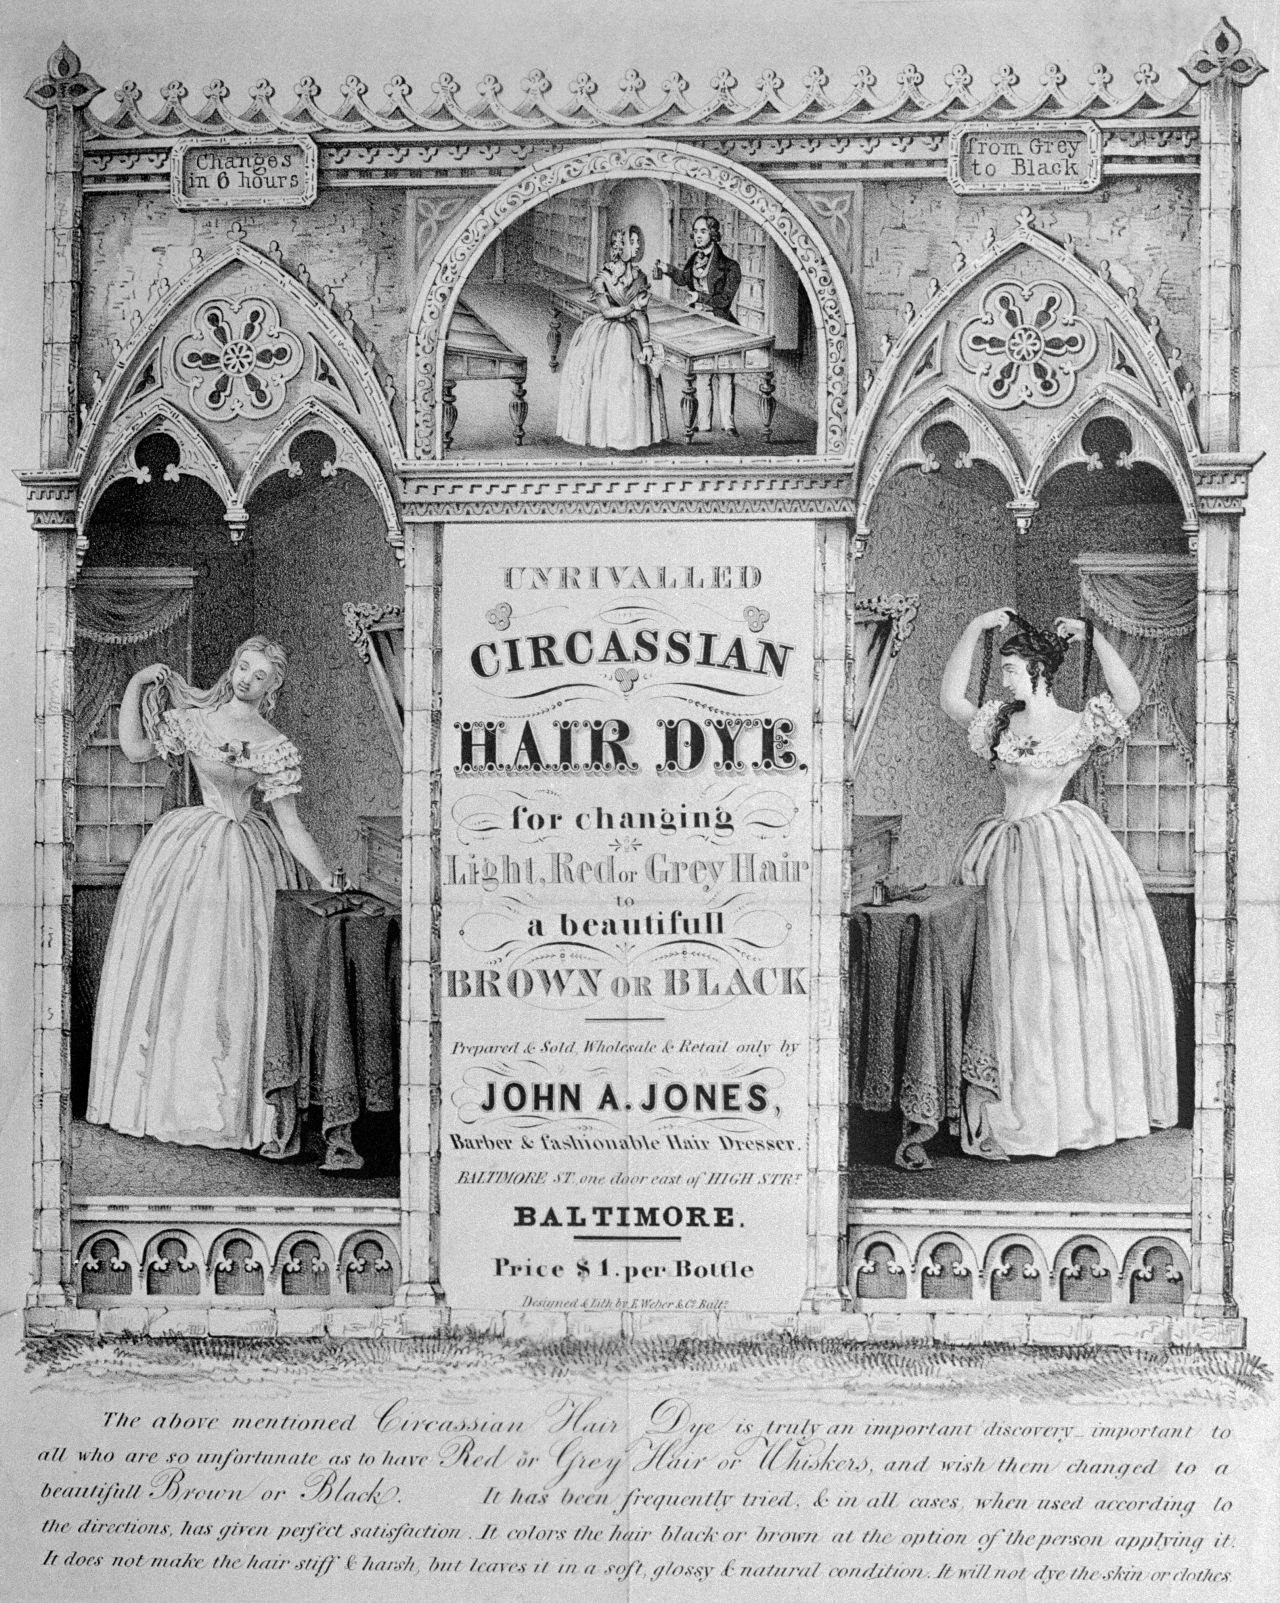 This advertisement for Circassian hair dye published in 1843 promises to change light hair into "beautiful" brown or black.